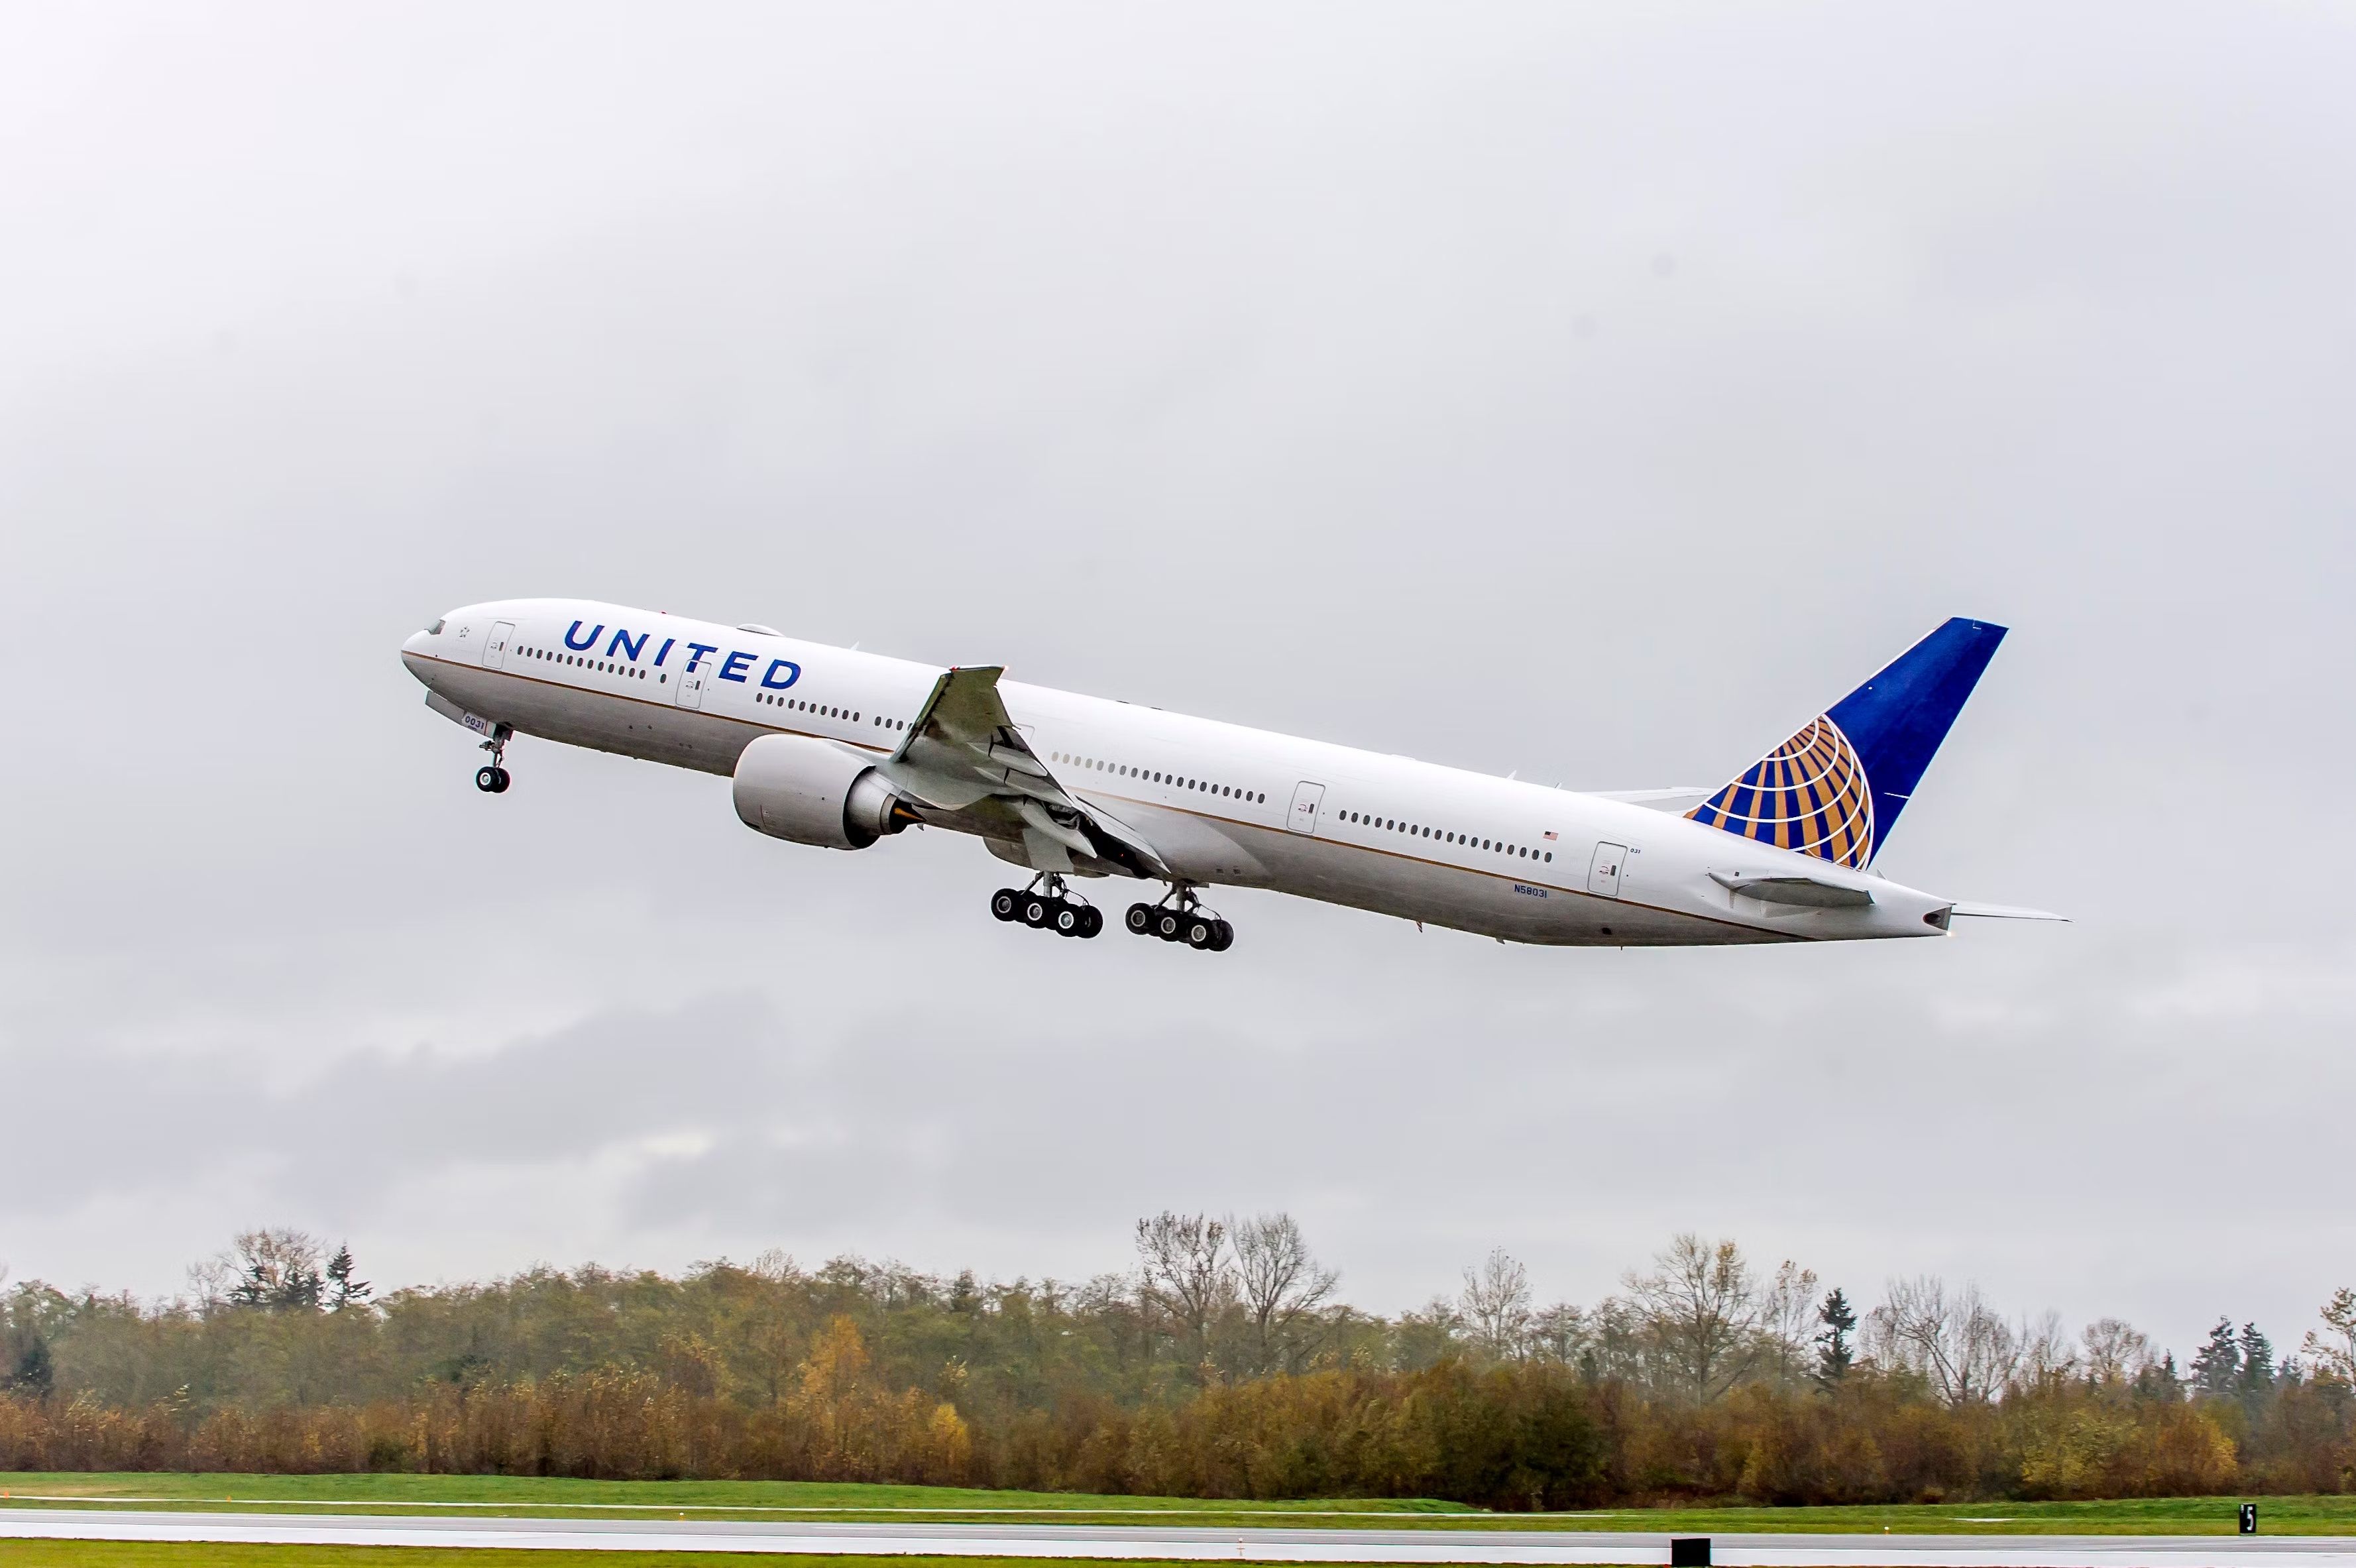 A United Airlines 777-300ER just after takeoff.